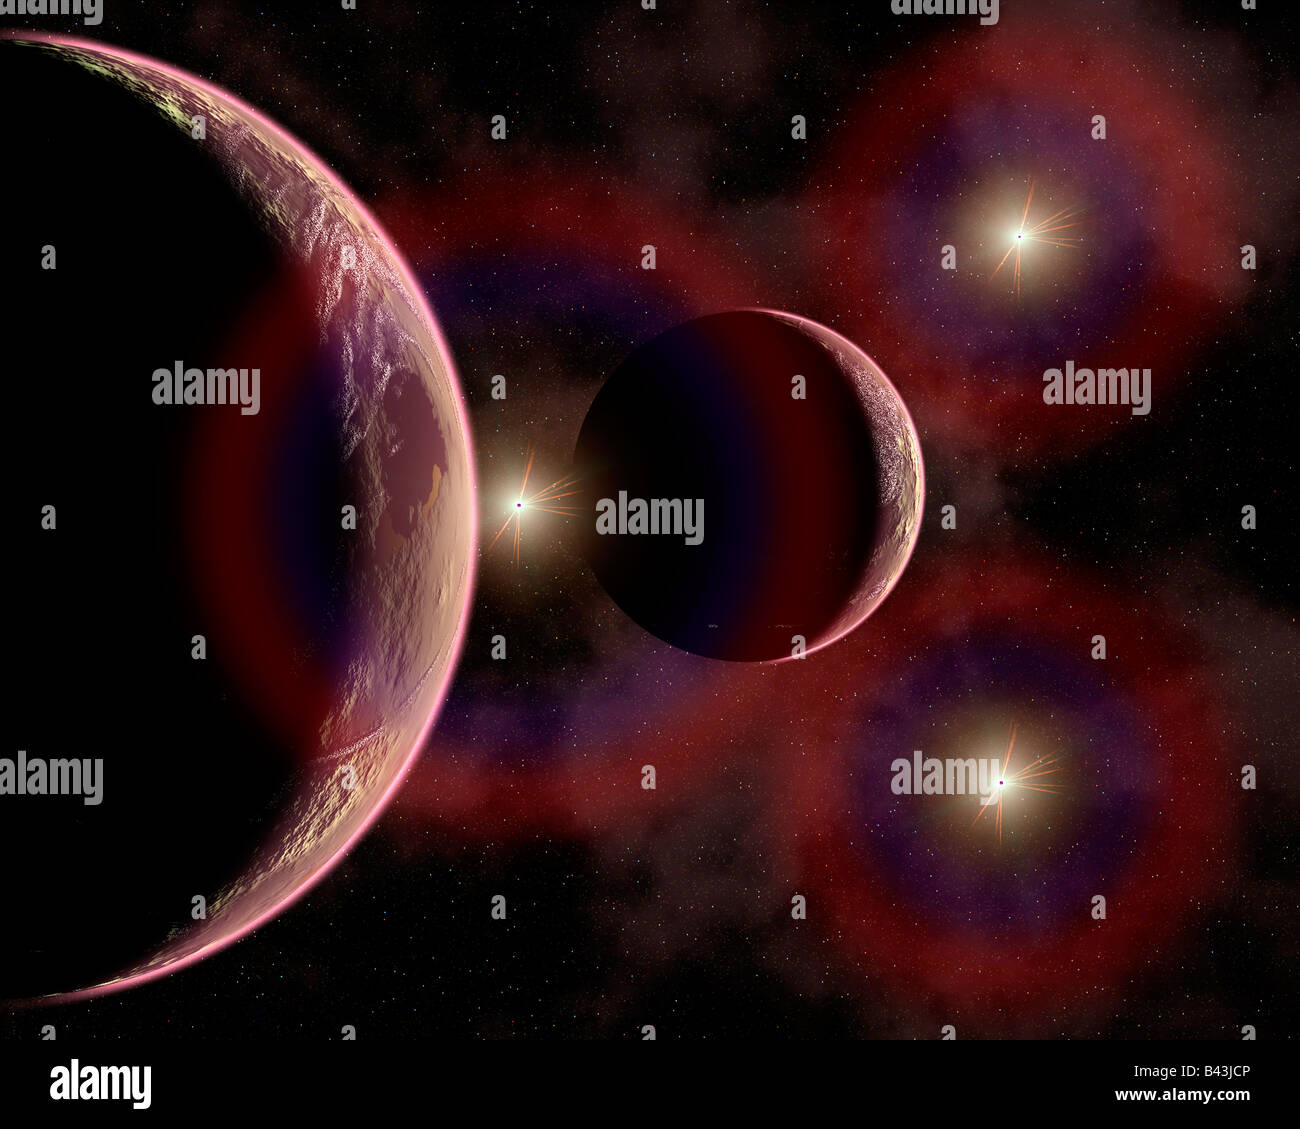 Distant Alien Red Planets, In Orbit Around A Trinary Star System. Stock Photo